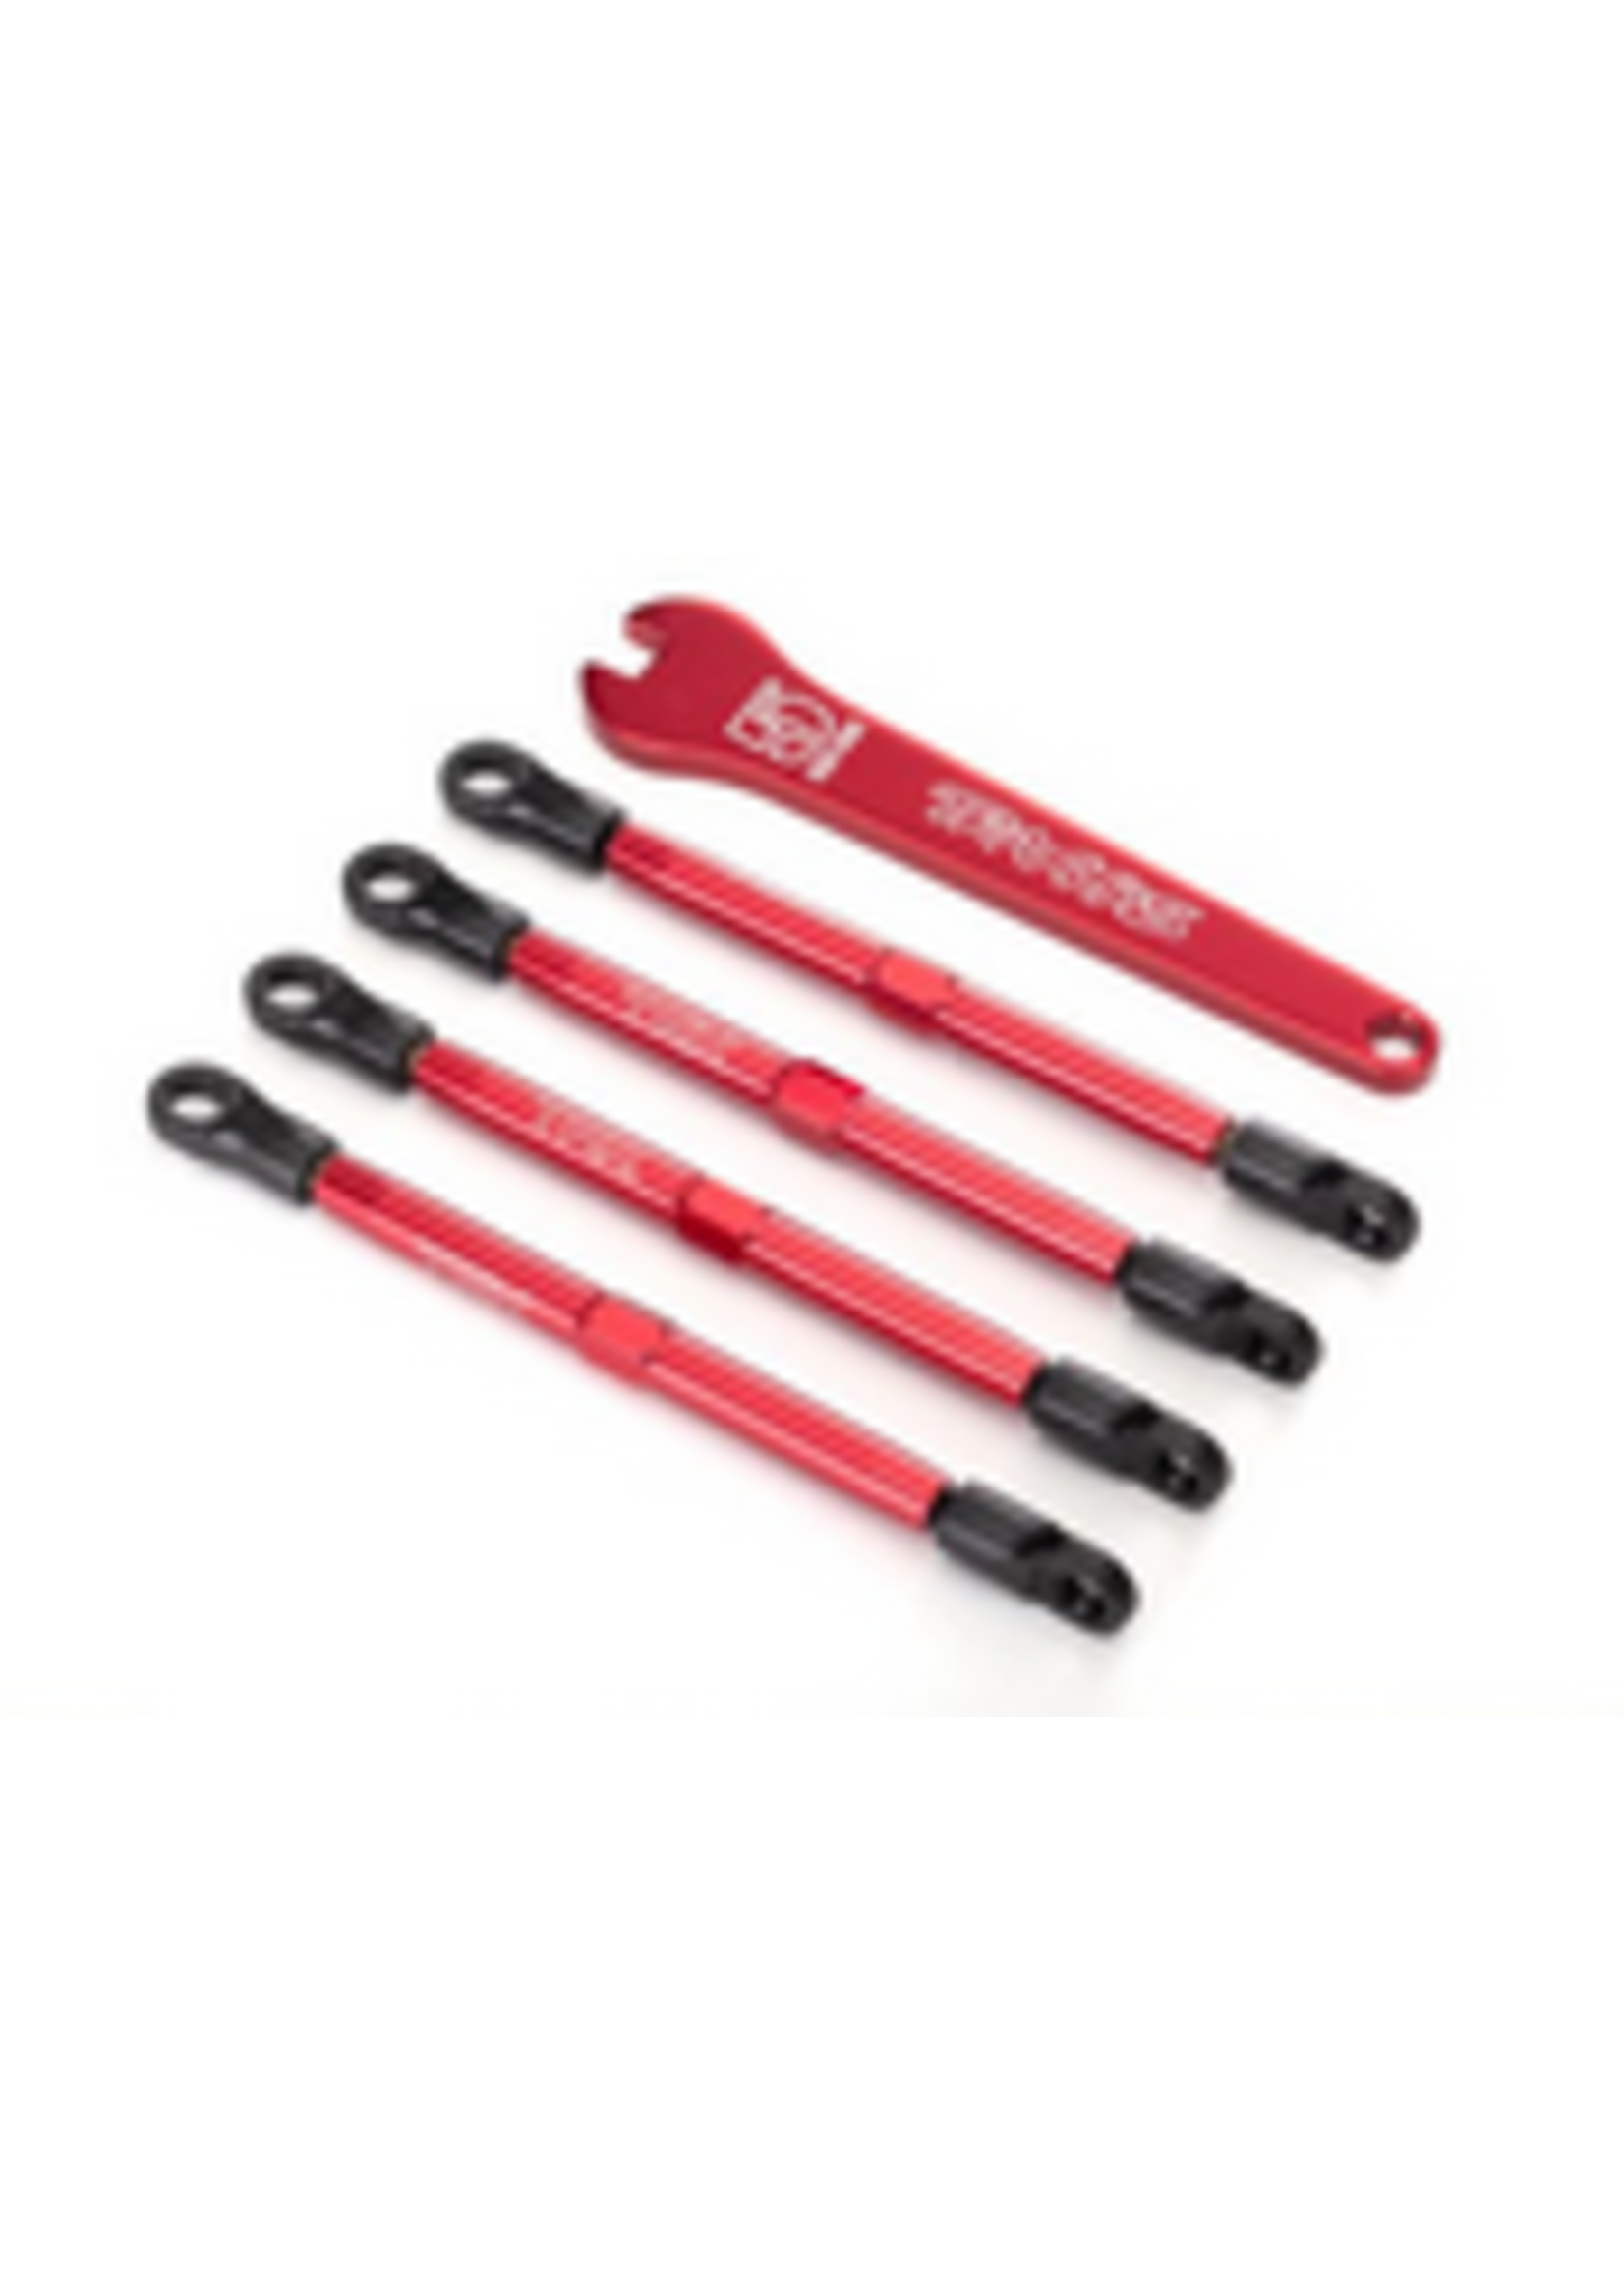 Traxxas TRA7138X Traxxas Toe links, aluminum (red-anodized) (4) (assembled with rod ends and threaded inserts)